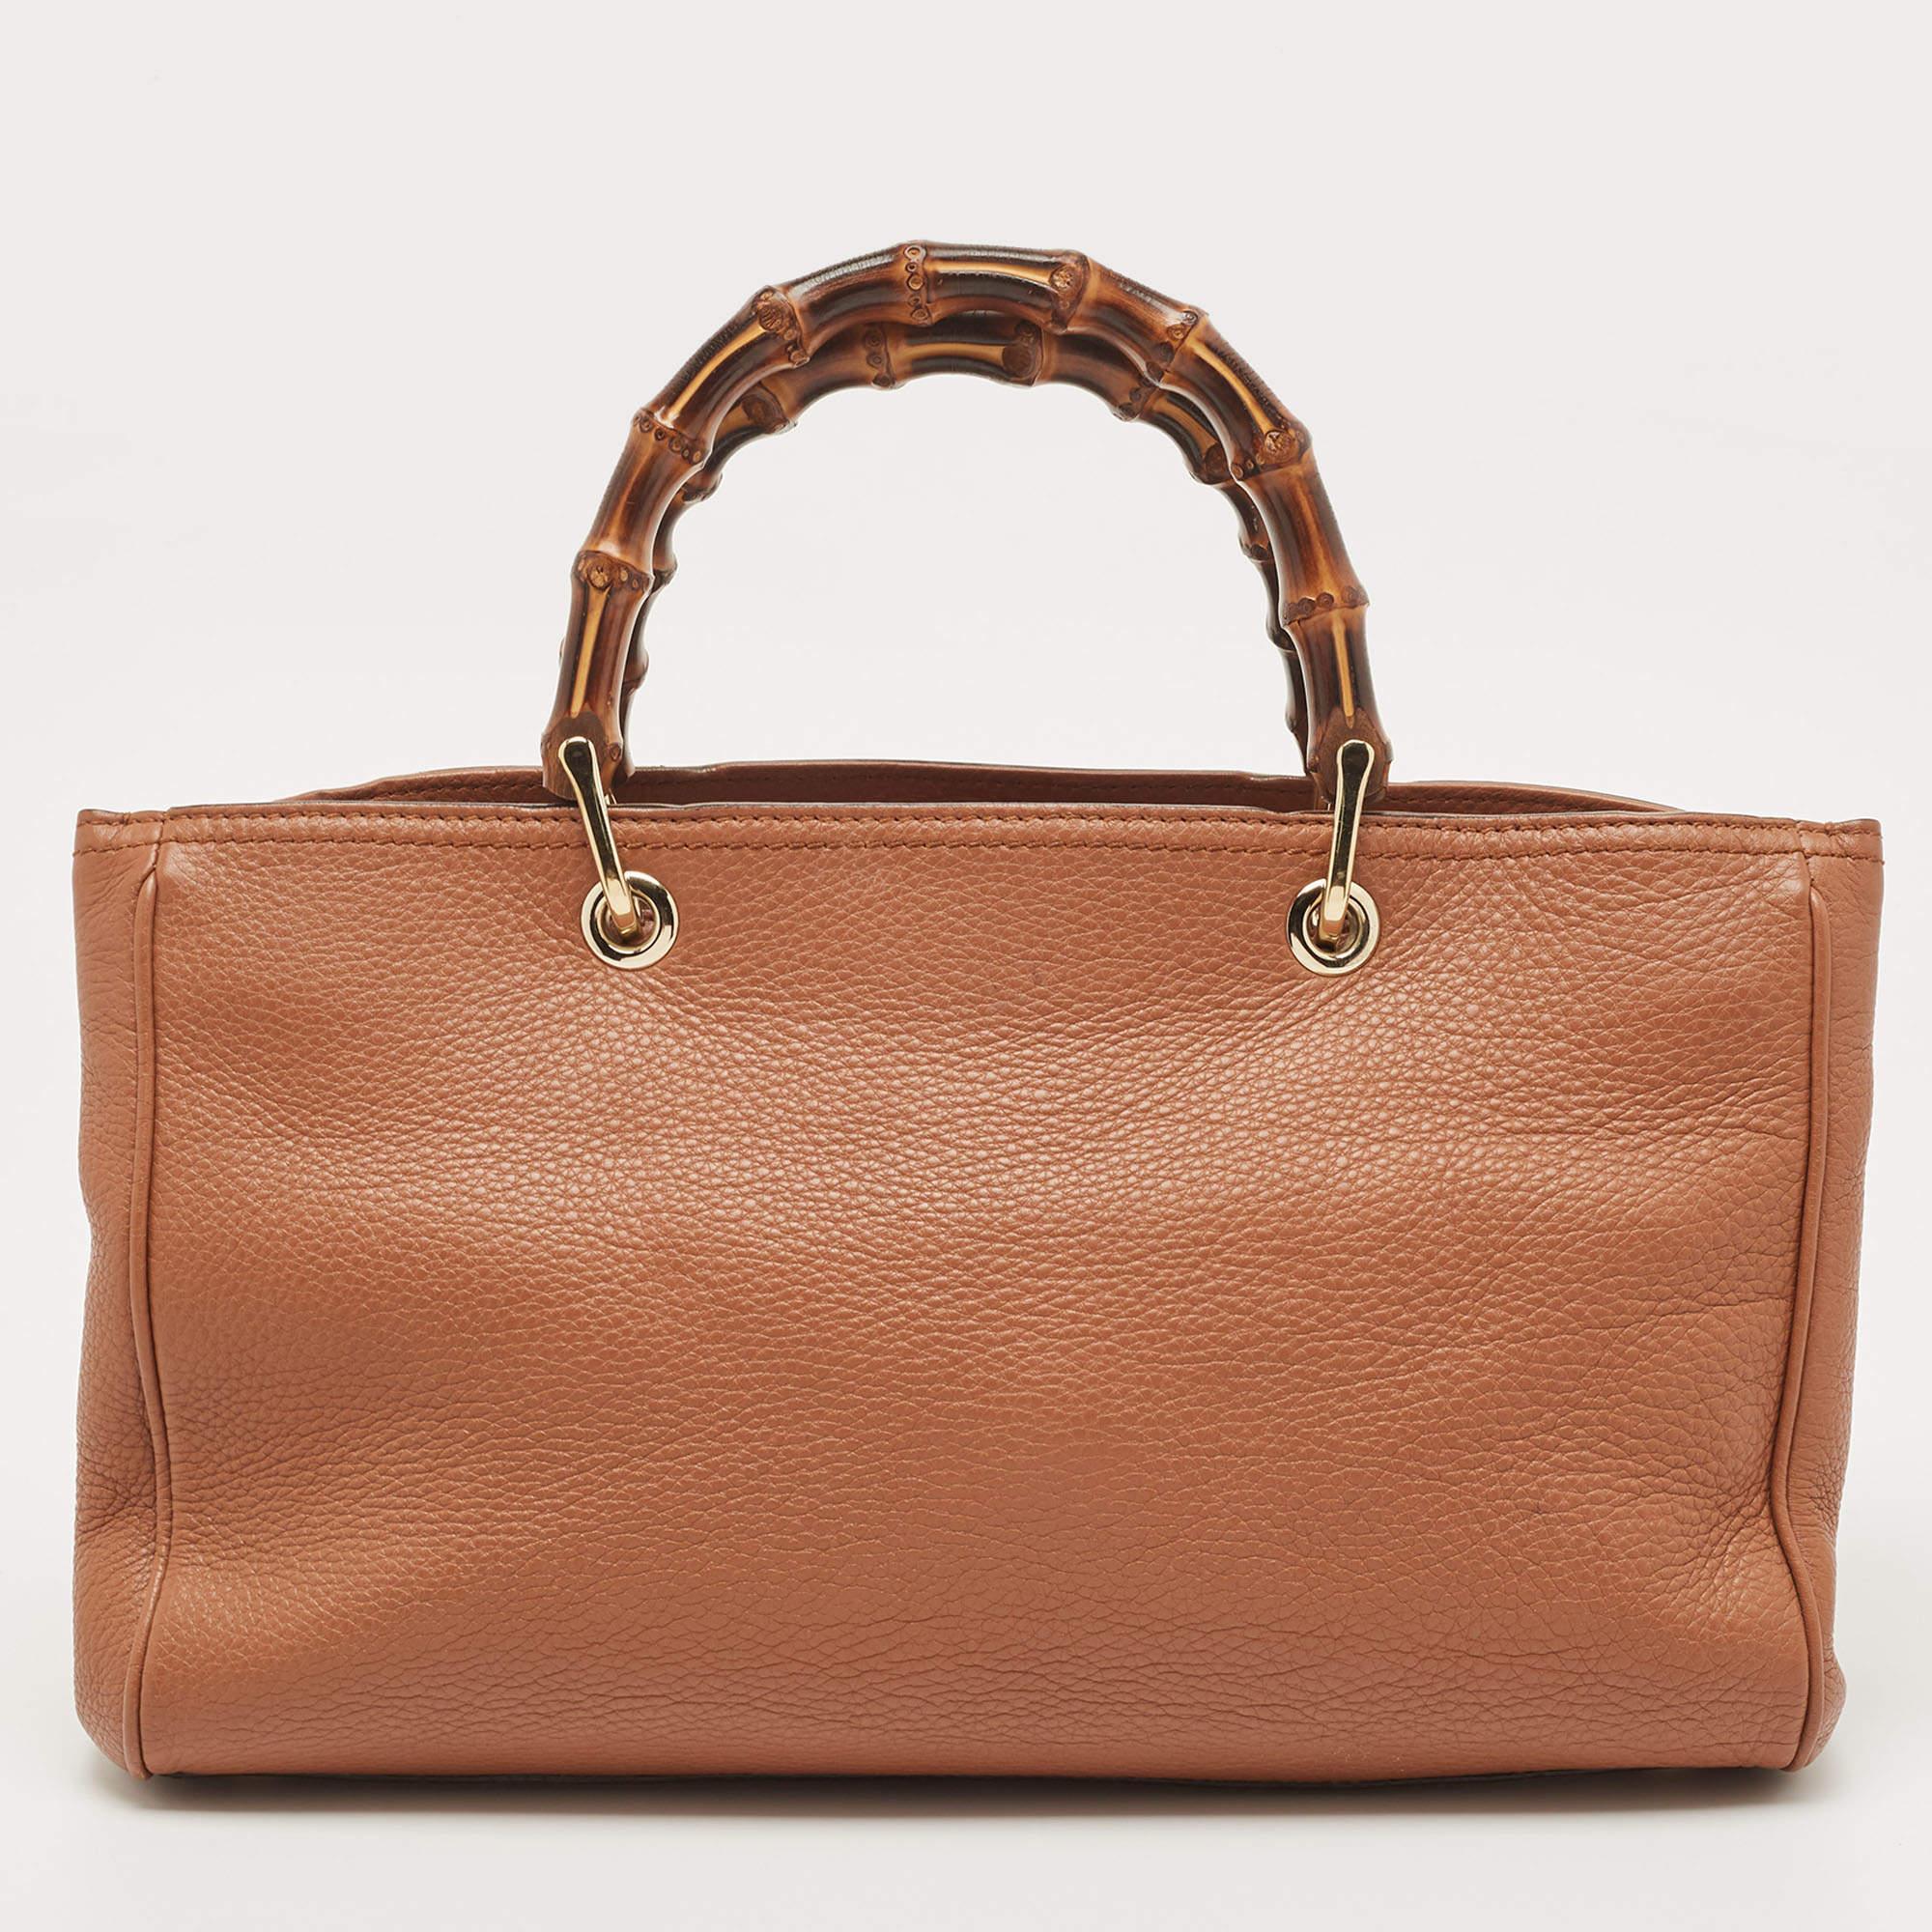 This Gucci Bamboo tote promises to take you through the day with ease, whether you're at work or out and about in the city. From its design to its structure, the leather bag promises charm and durability. It has top bamboo handles, an optional